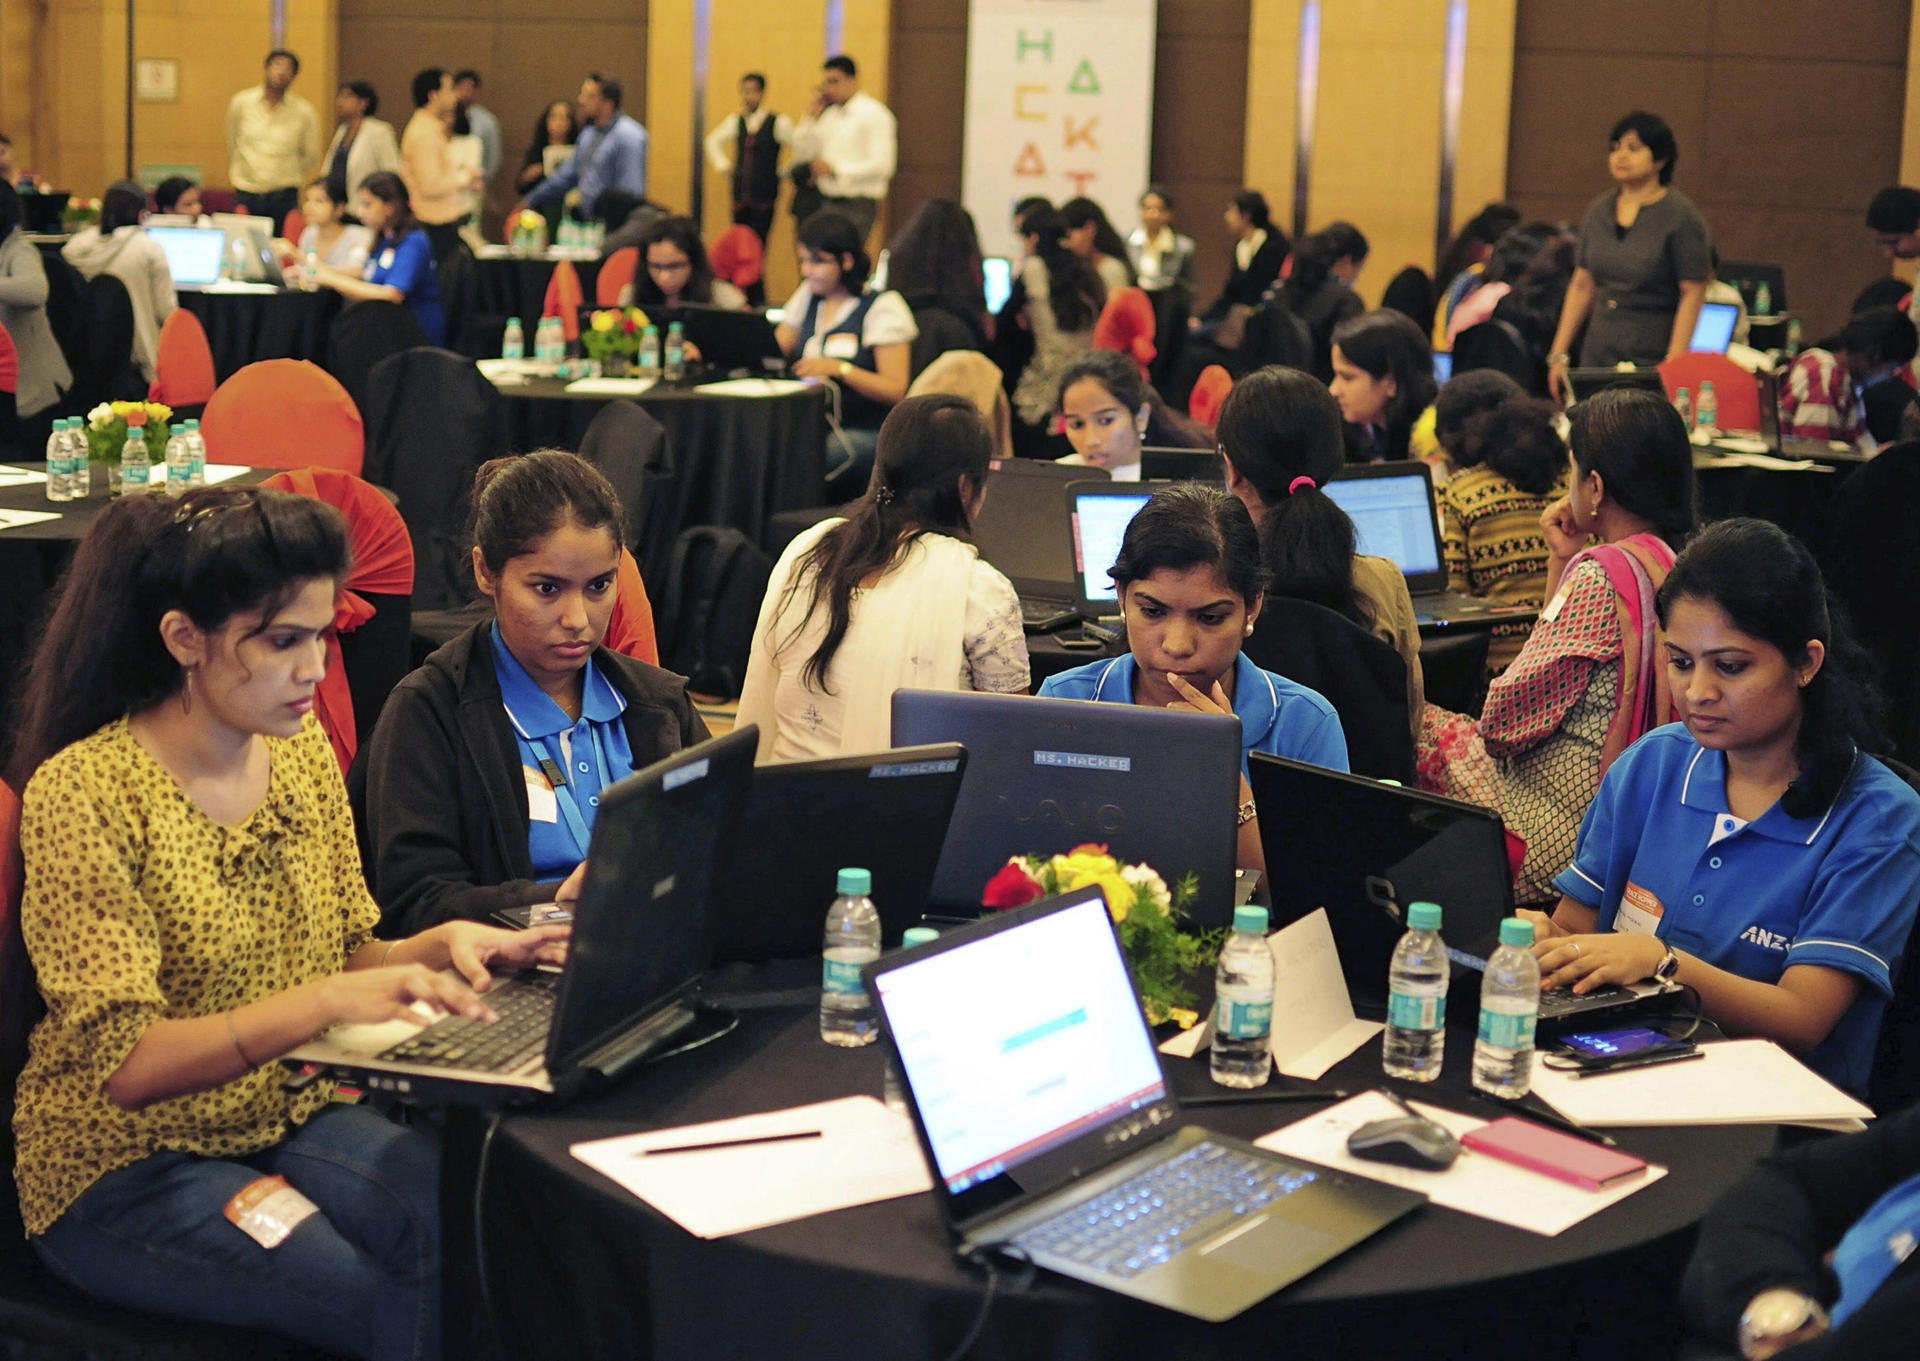 A file picture of people take part in a Hackathon as part of the Grace Hopper Celebration of Women in Computing, Bangalore, India, 19 November 2014. Over one hundred software professionals and students took part in the event themed 'Tech for Good' for ethical hackers, a day long coding event to build applications which could benenfit society. EPA/JAGADEESH NV